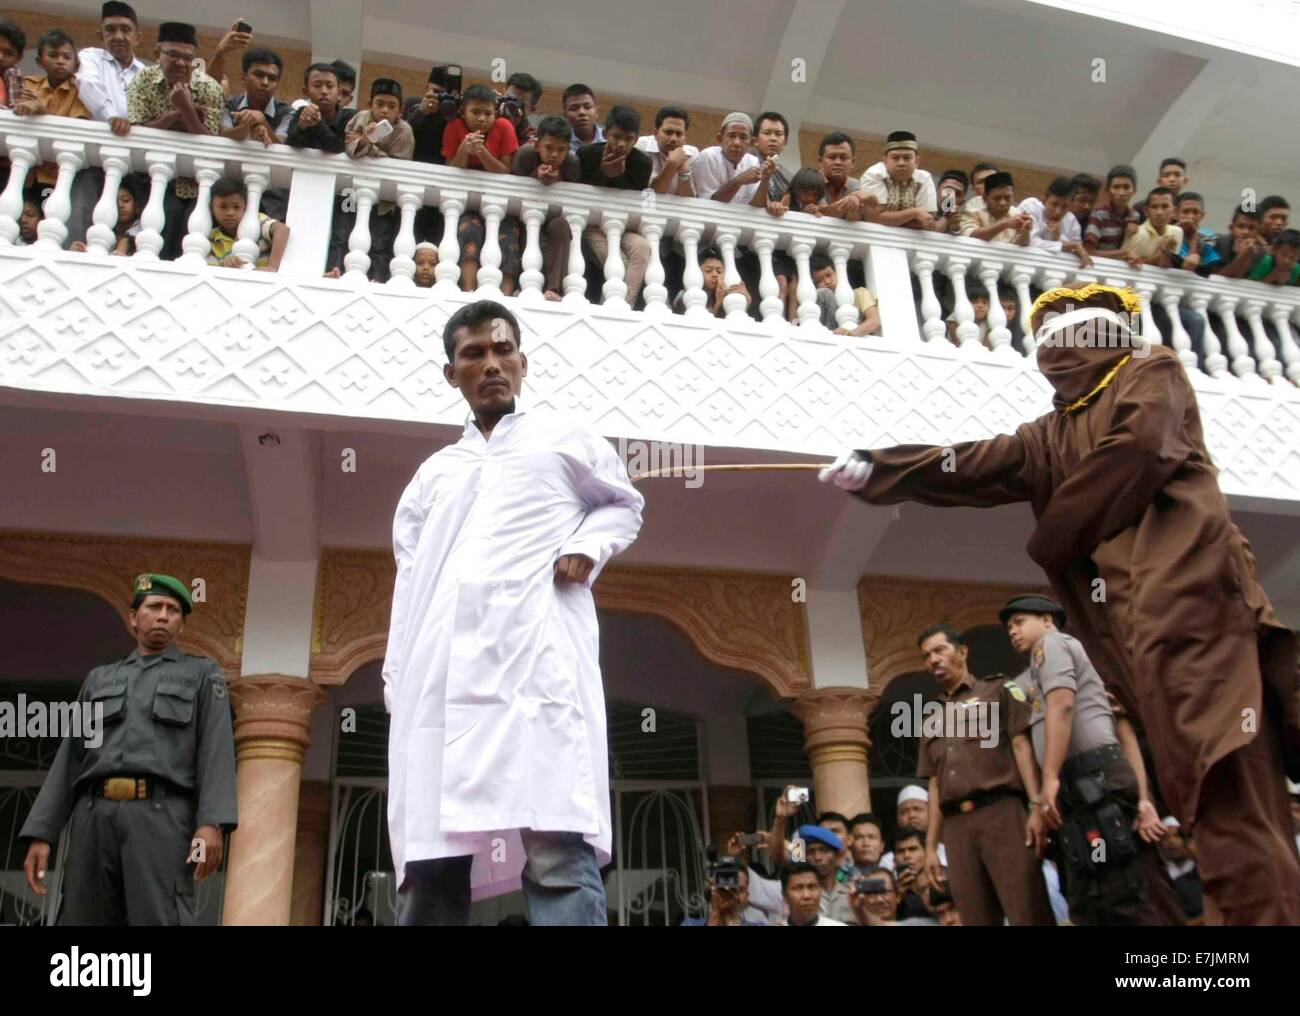 Aceh, Indonesia. 19th September, 2014. A Sharia law official whips a man convicted of gambling with a rattan cane during a public caning in Aceh, Indonesia, on Sept. 19, 2014. The provincial administration of Aceh, in the north of the Indonesian island of Sumatra, has approved a law called the 'Qanun Jinayat' implemented a version of Islamic Sharia law since 2001 Credit:  Xinhua/Alamy Live News Stock Photo